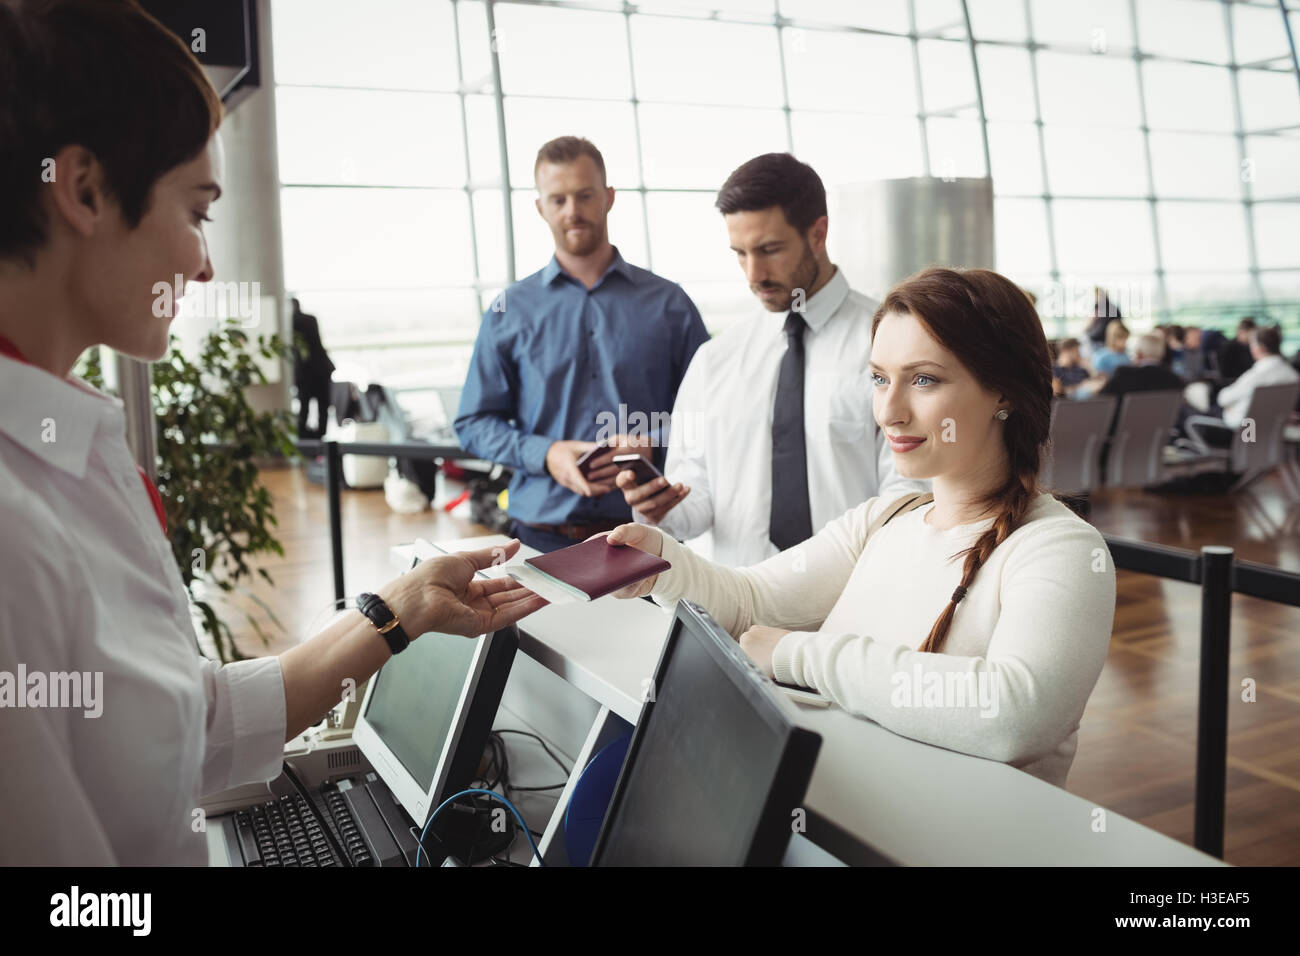 Woman giving her passport to airline check-in attendant Stock Photo